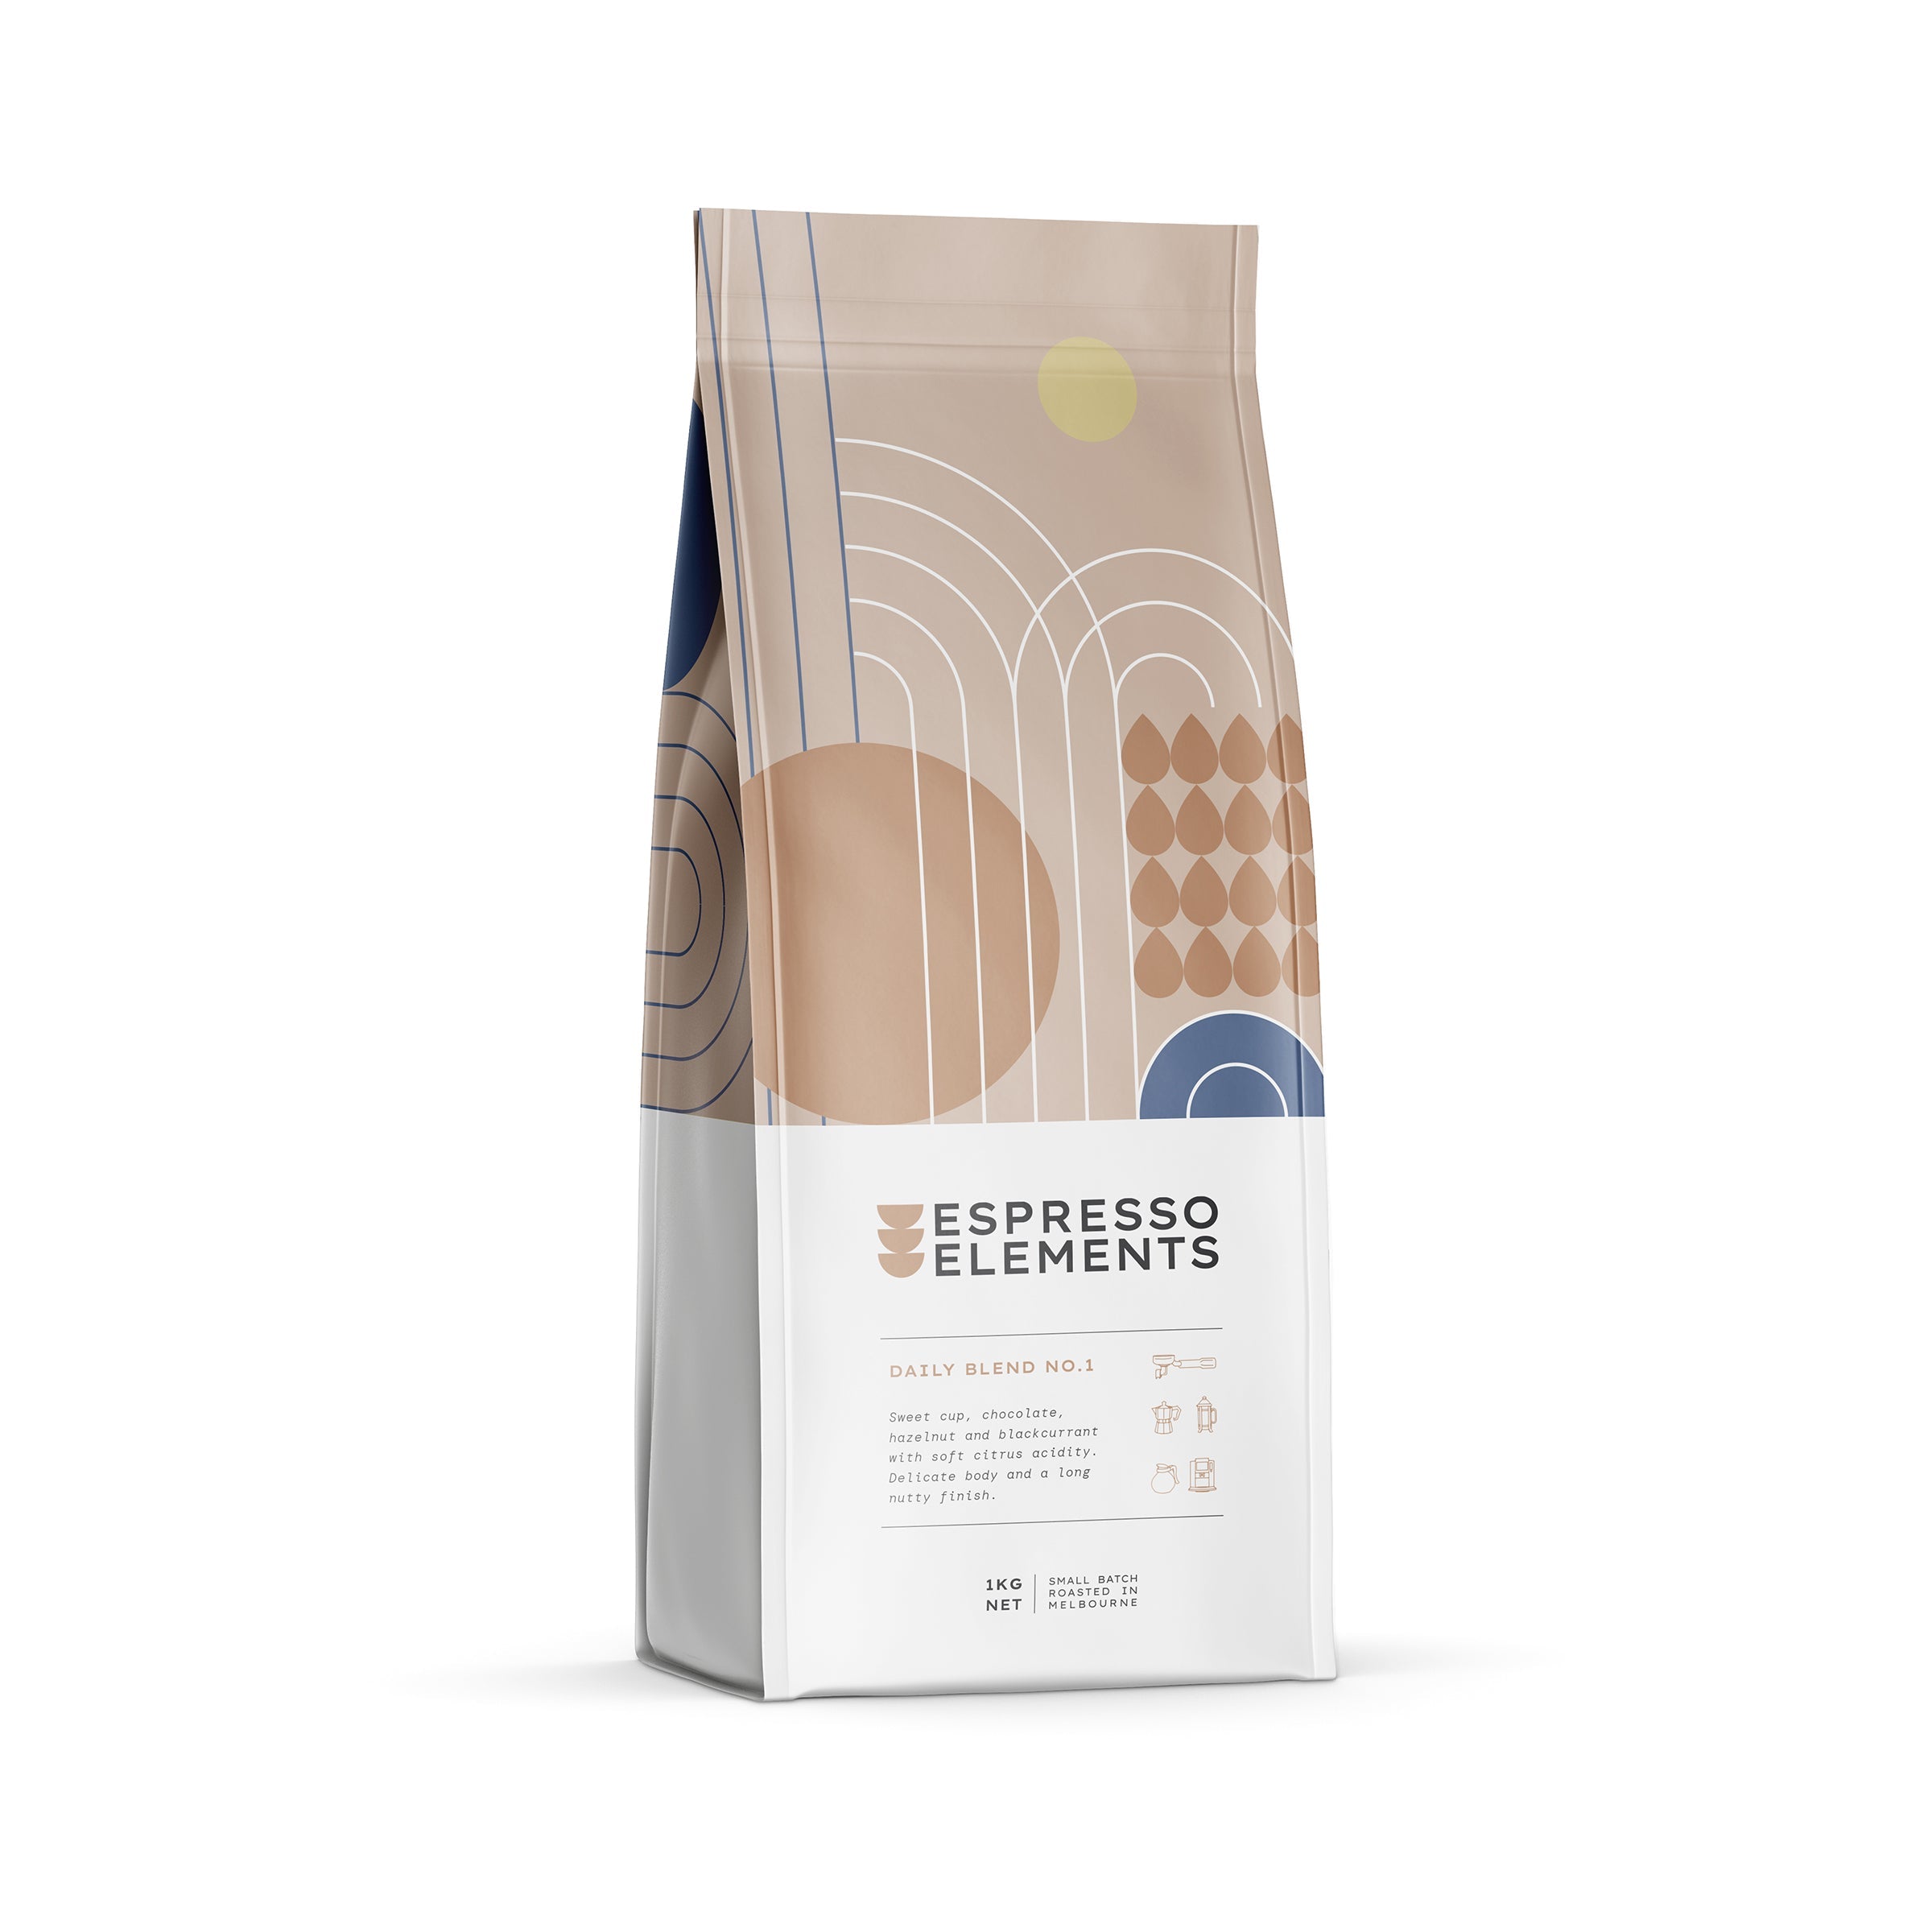 Automatica Blend Coffee Beans